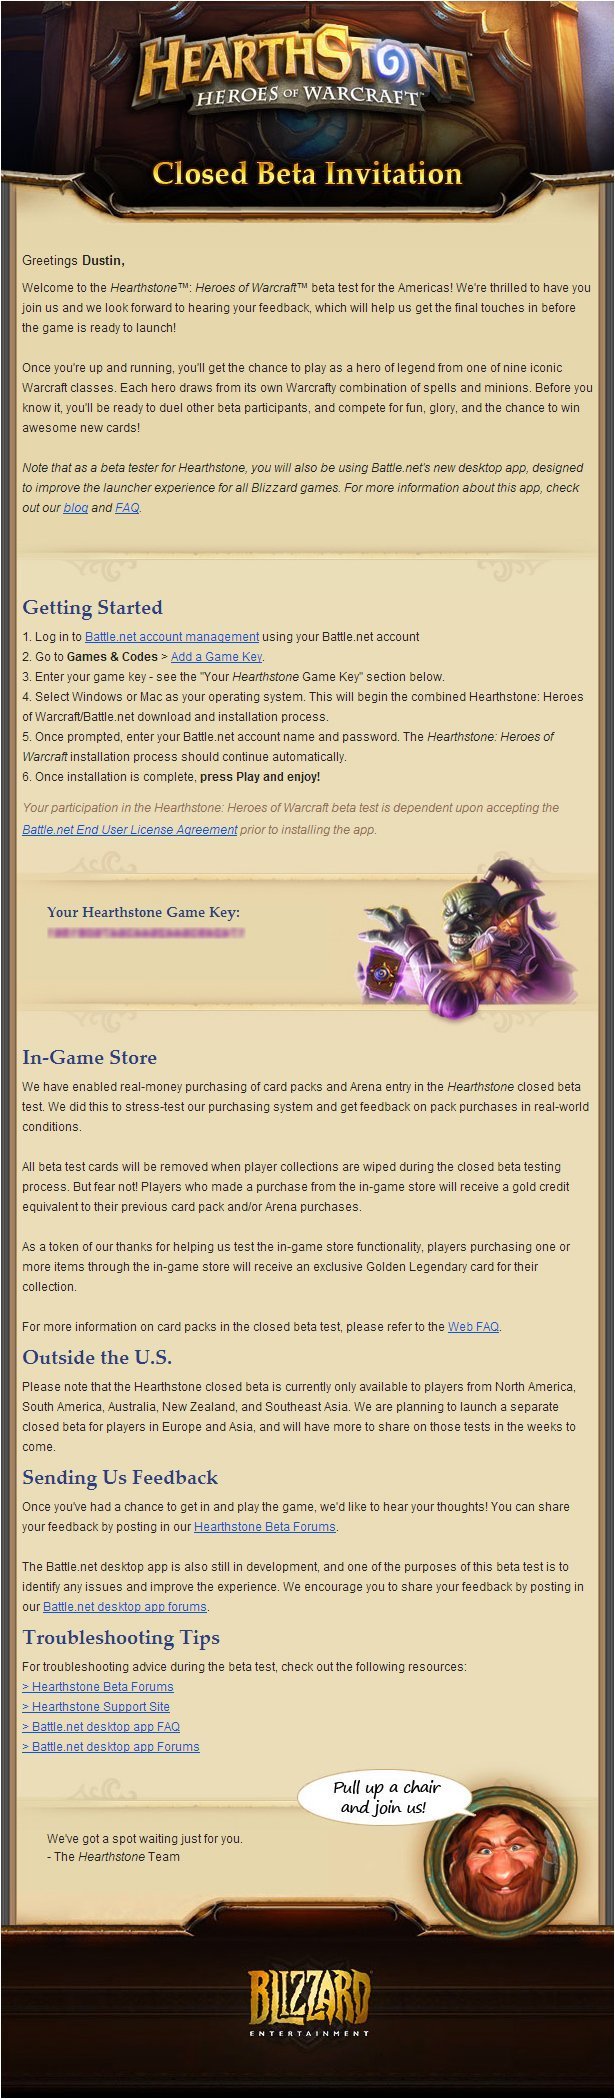 HearthStone: Heroes of WarCraft Email Beta Invitation